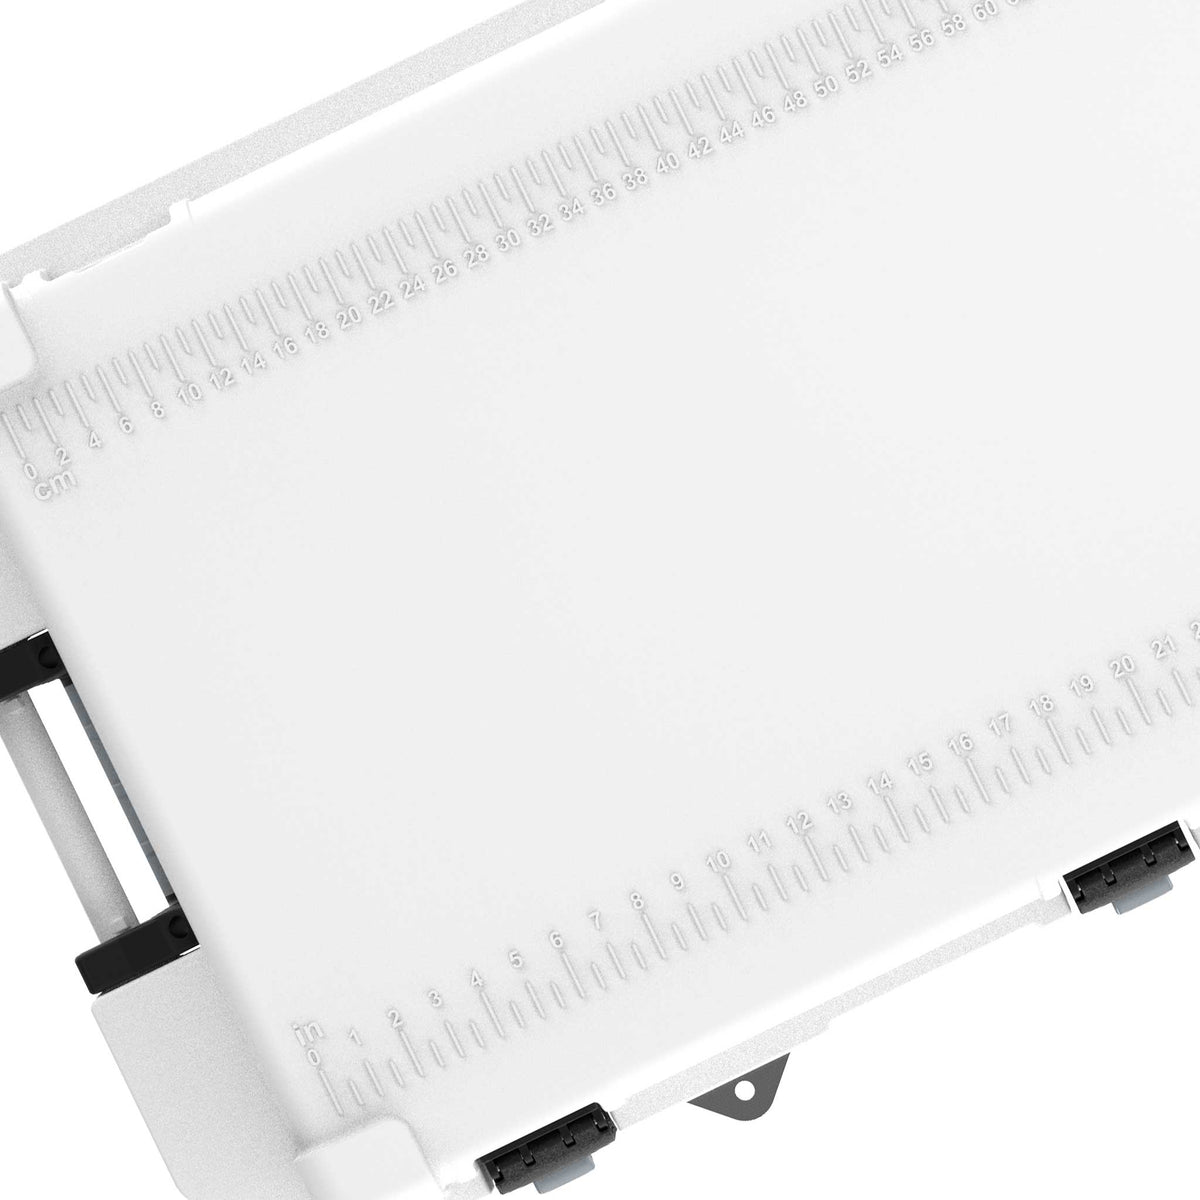 Pelican™ 150QT Elite Cooler comes with a ruler in inches and centimeters on the lid